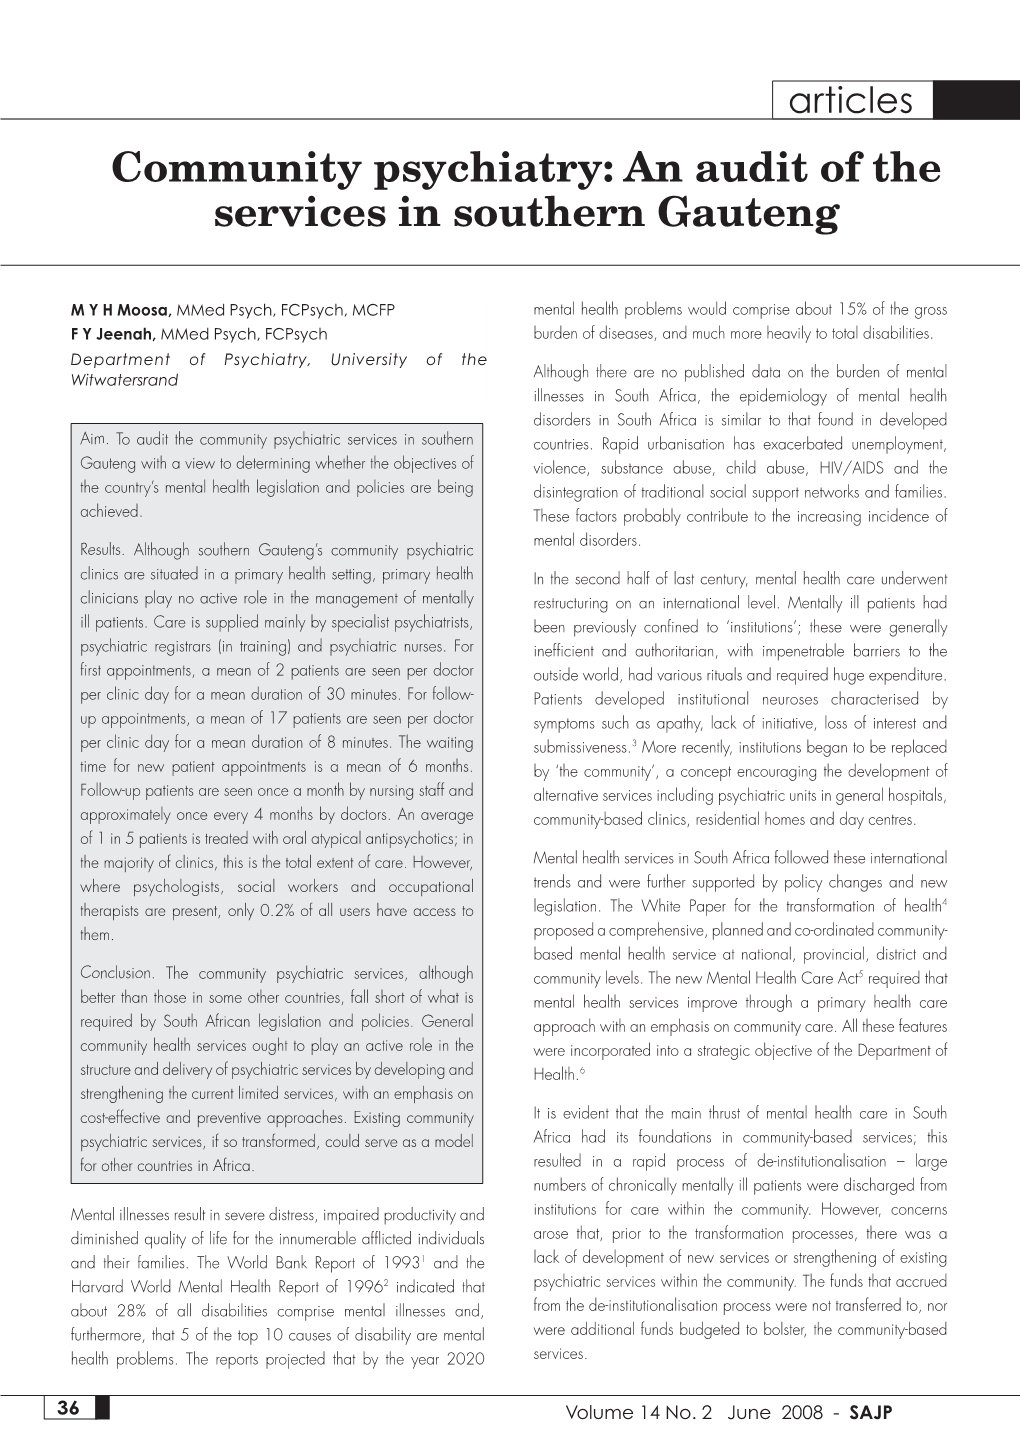 Community Psychiatry: an Audit of the Services in Southern Gauteng